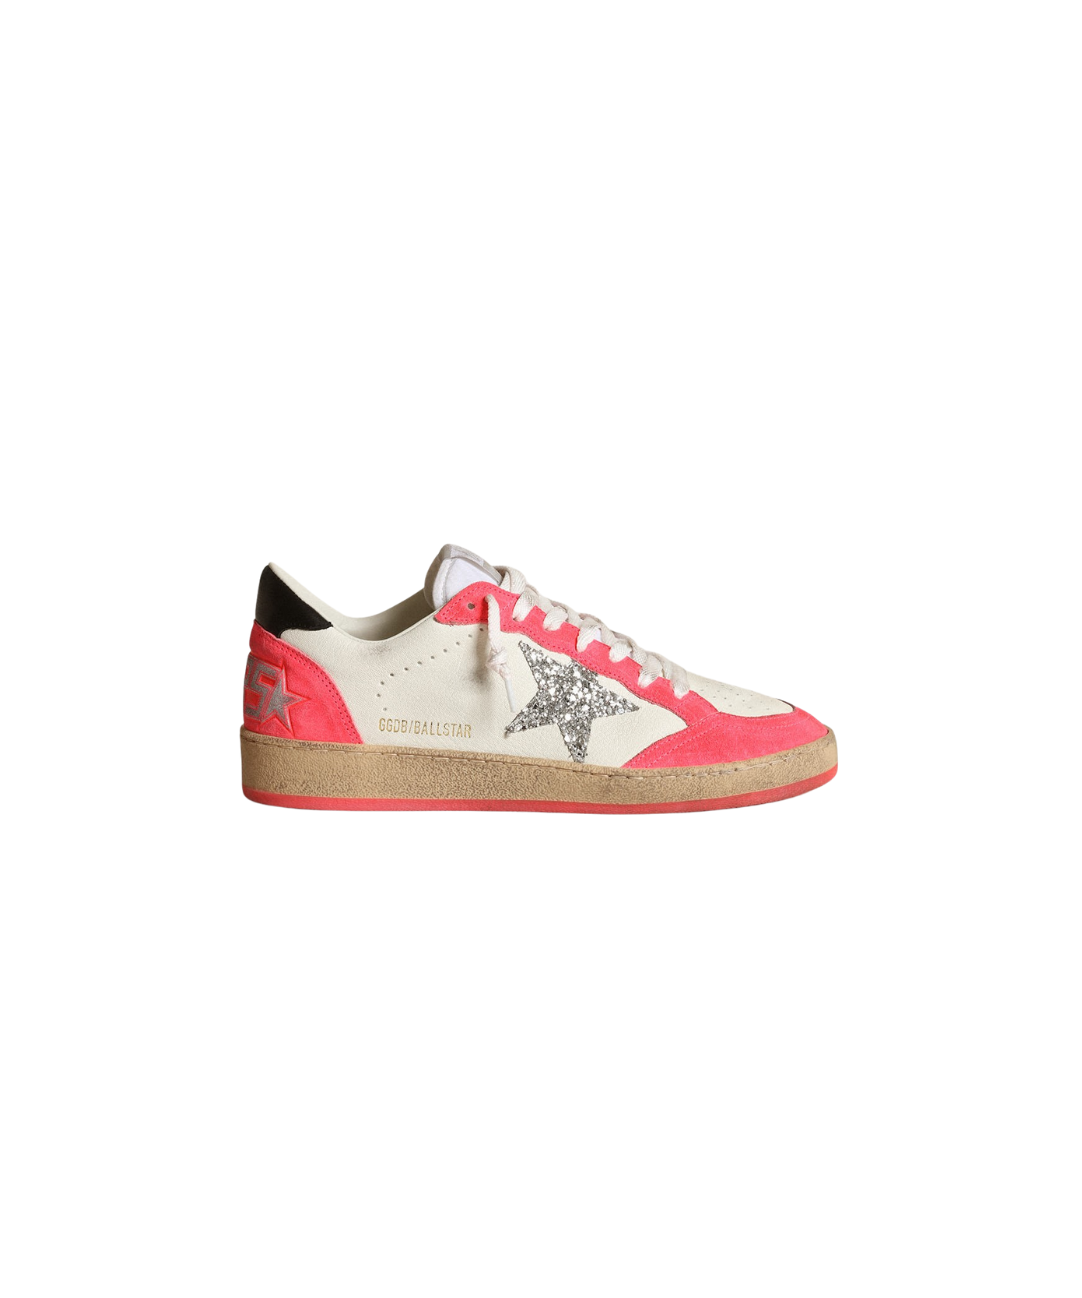 Image of a white leather Golden Goose sneaker with pink suede accents and a silver star.